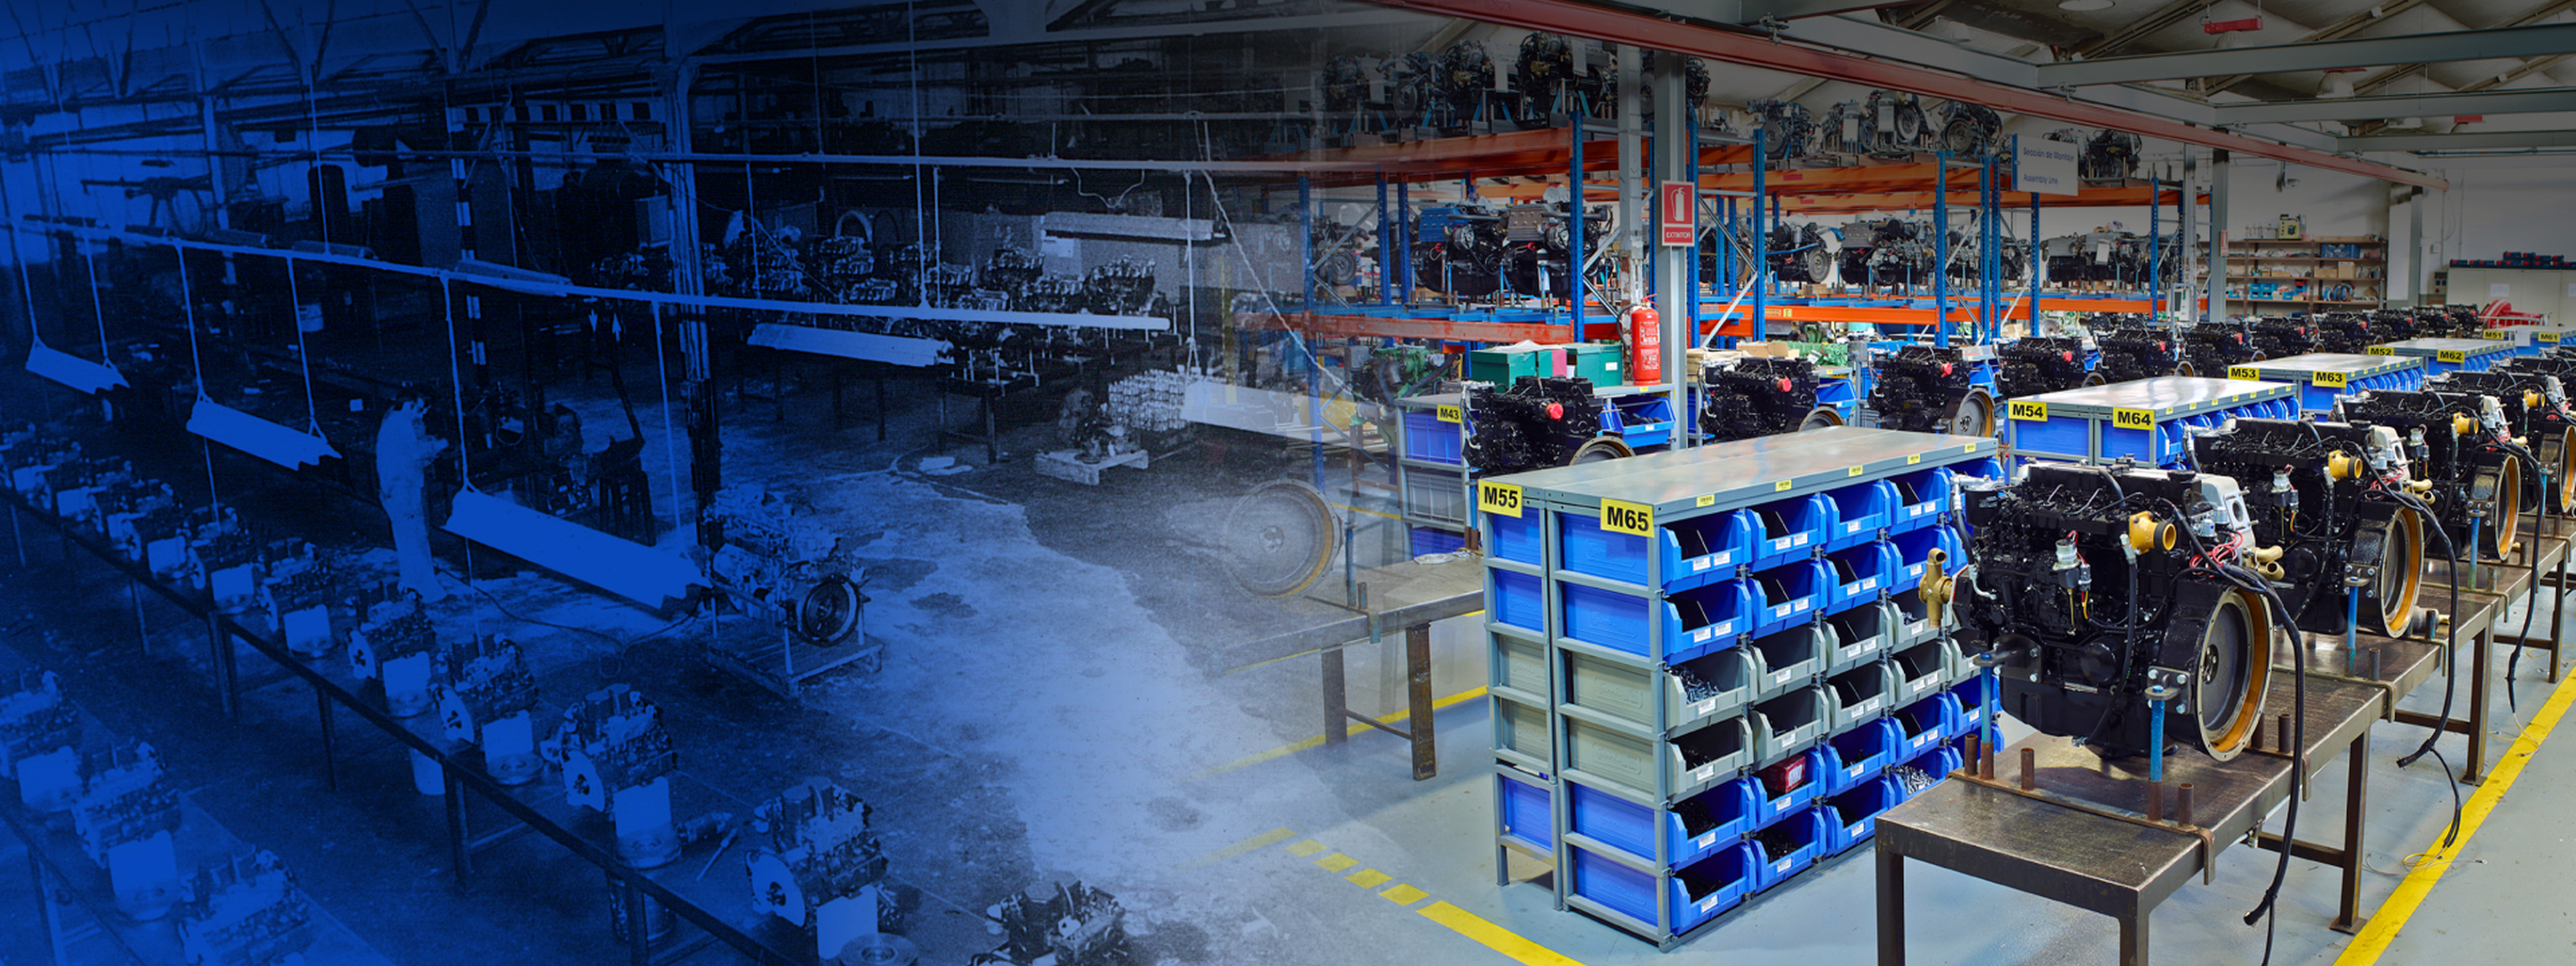 Manufacturing the best solutions for more than 100 years